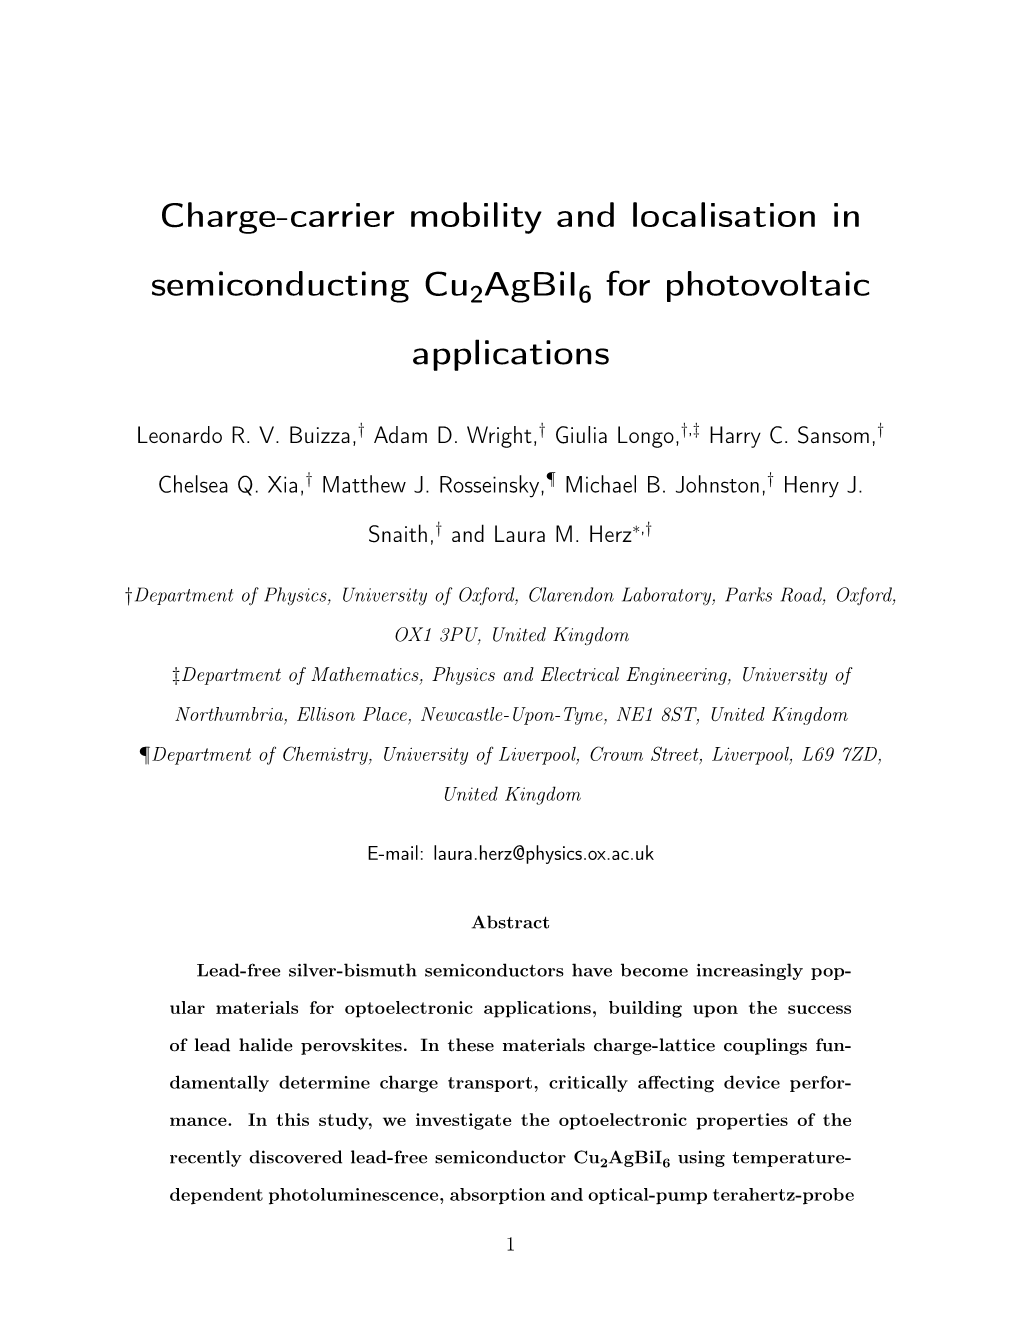 Charge-Carrier Mobility and Localisation in Semiconducting Cu2 Agbii6 for Photovoltaic Applications